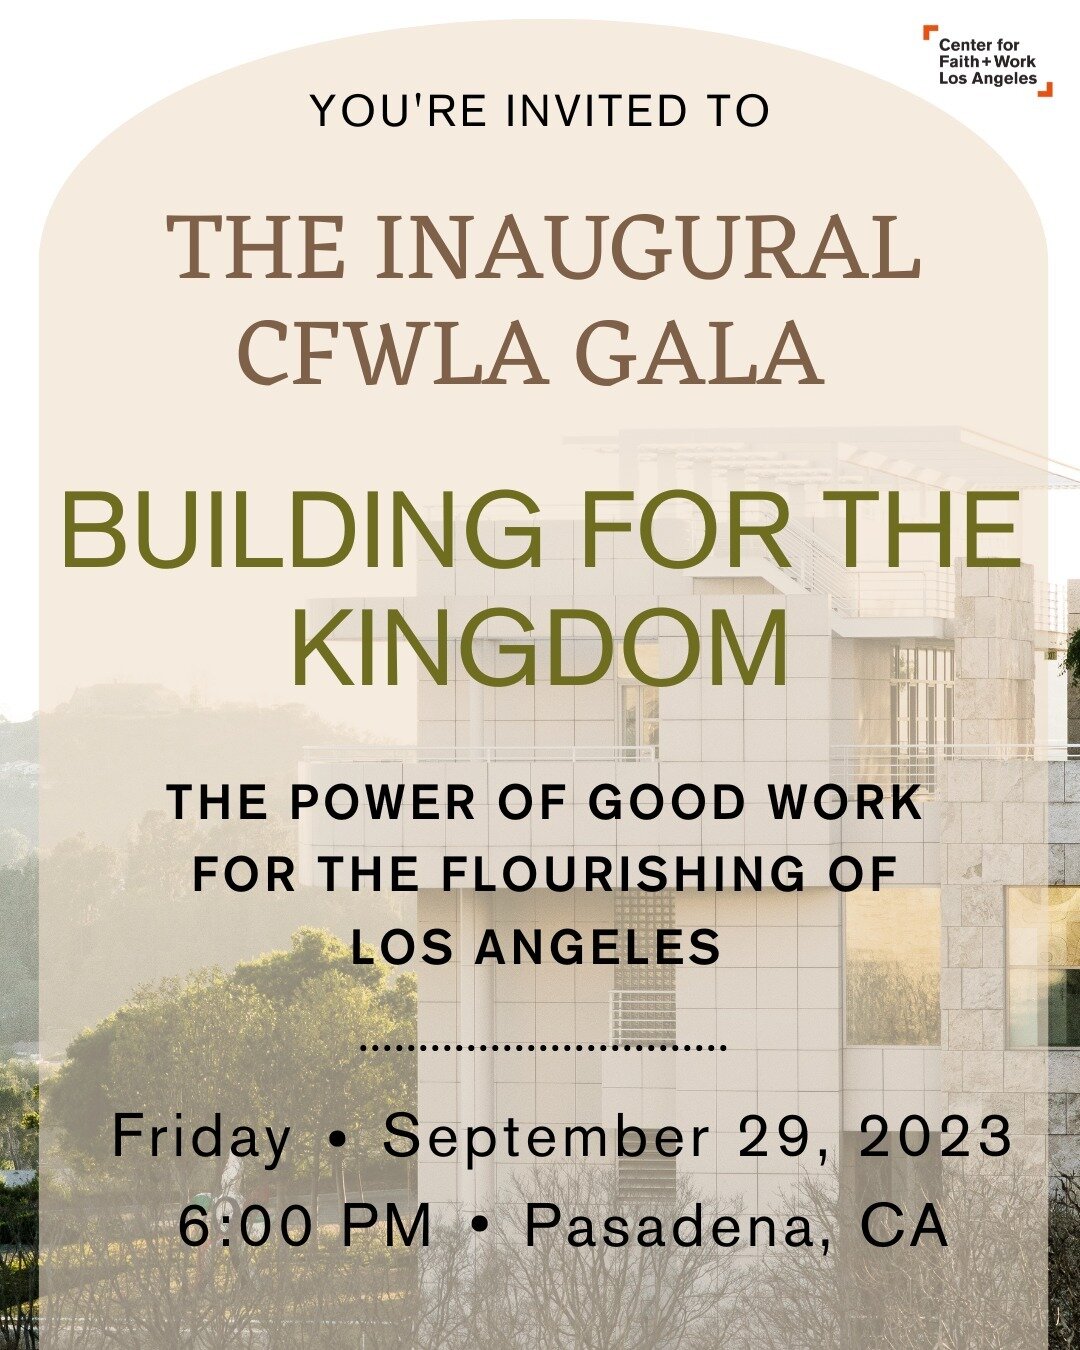 We are thrilled to announce and invite you to our Inaugural Gala! This elegant evening at a historic and premier venue in Pasadena will celebrate those who have been impacted and seen their work transformed through the Center for Faith + Work Los Ang